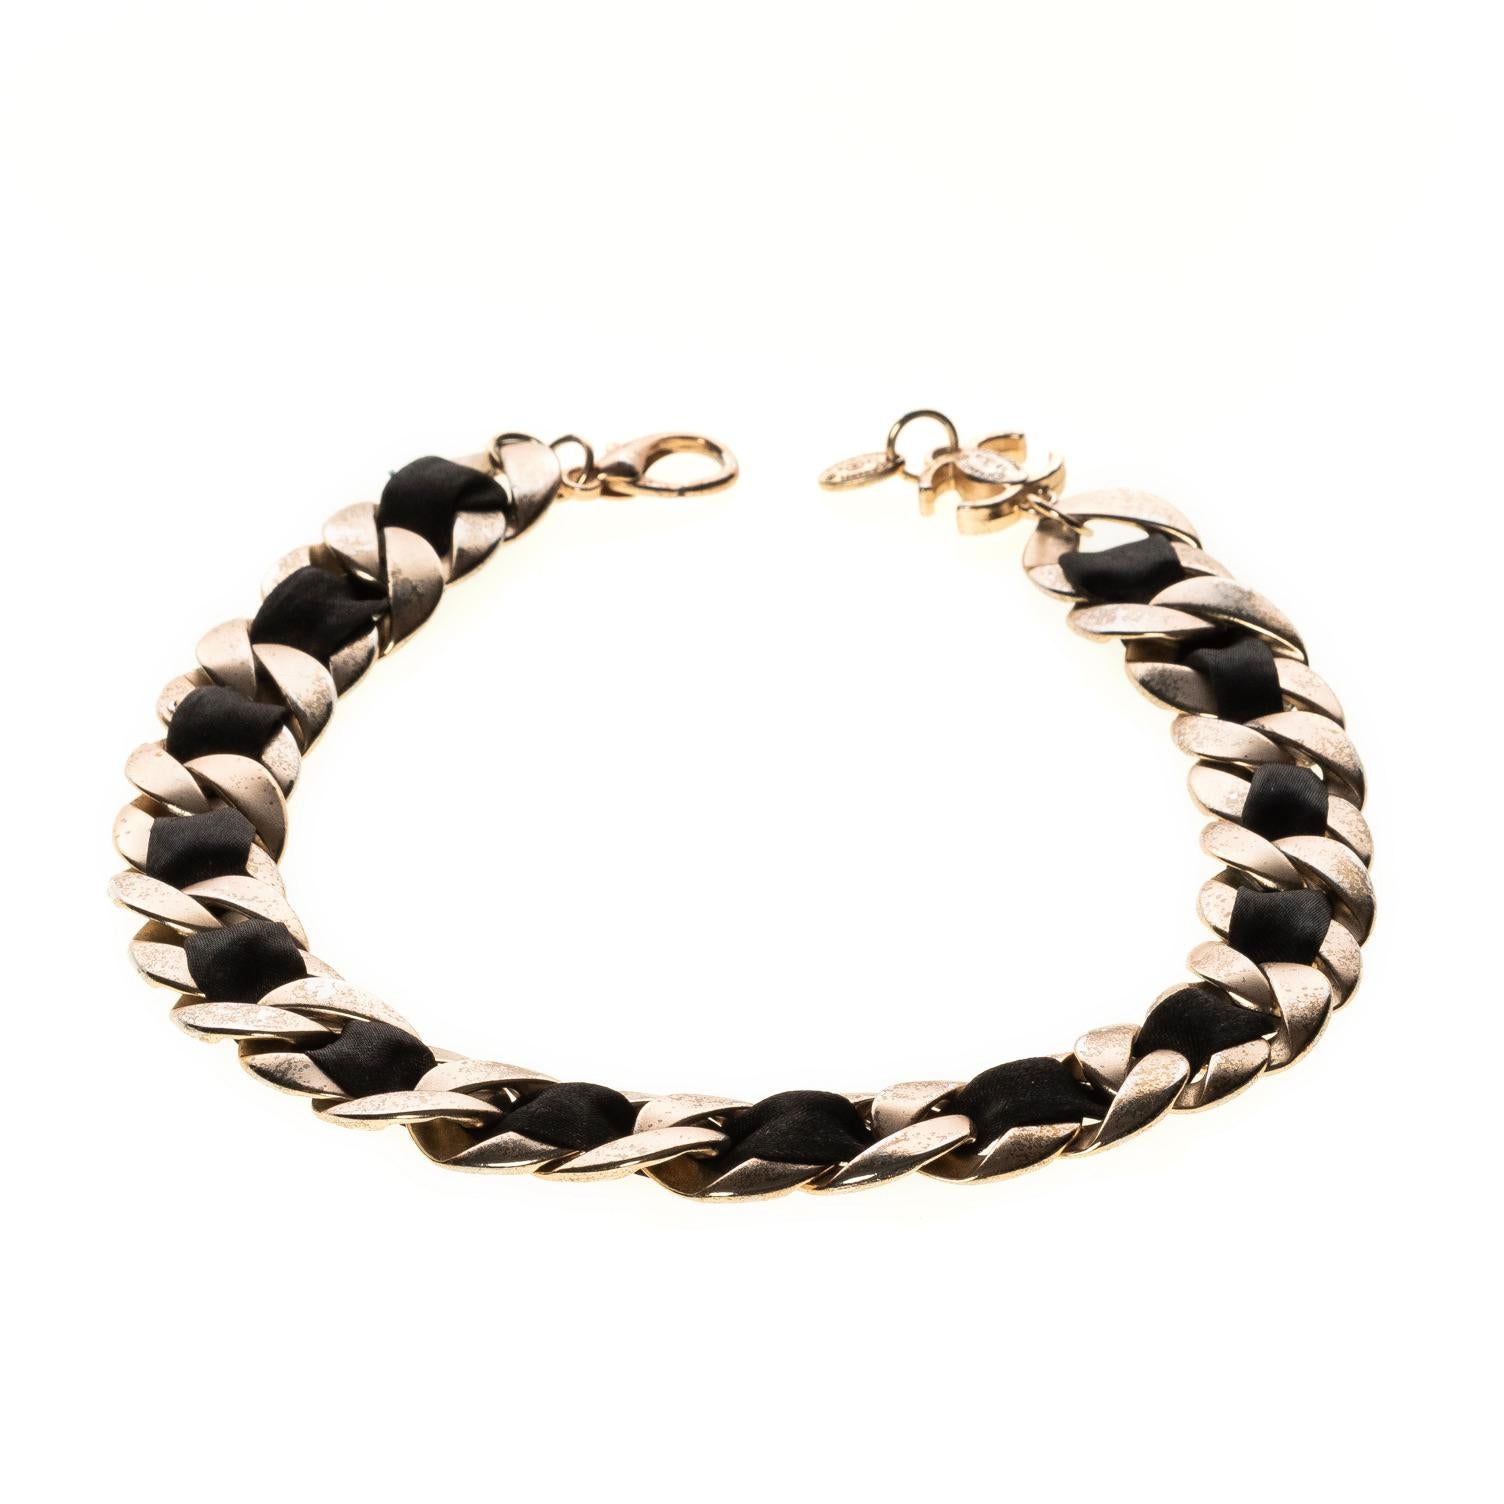 Chanel choker with a matte silver metal chain interlaced with black satin ribbon, clip at the end with CC logo. From 2009 Cruise collection. 

COLOR: Silver and black
MATERIAL: Metal & satin
ITEM CODE: 13 A
MEASURES: W 2cm, L 40.5 cm
EST. RETAIL: